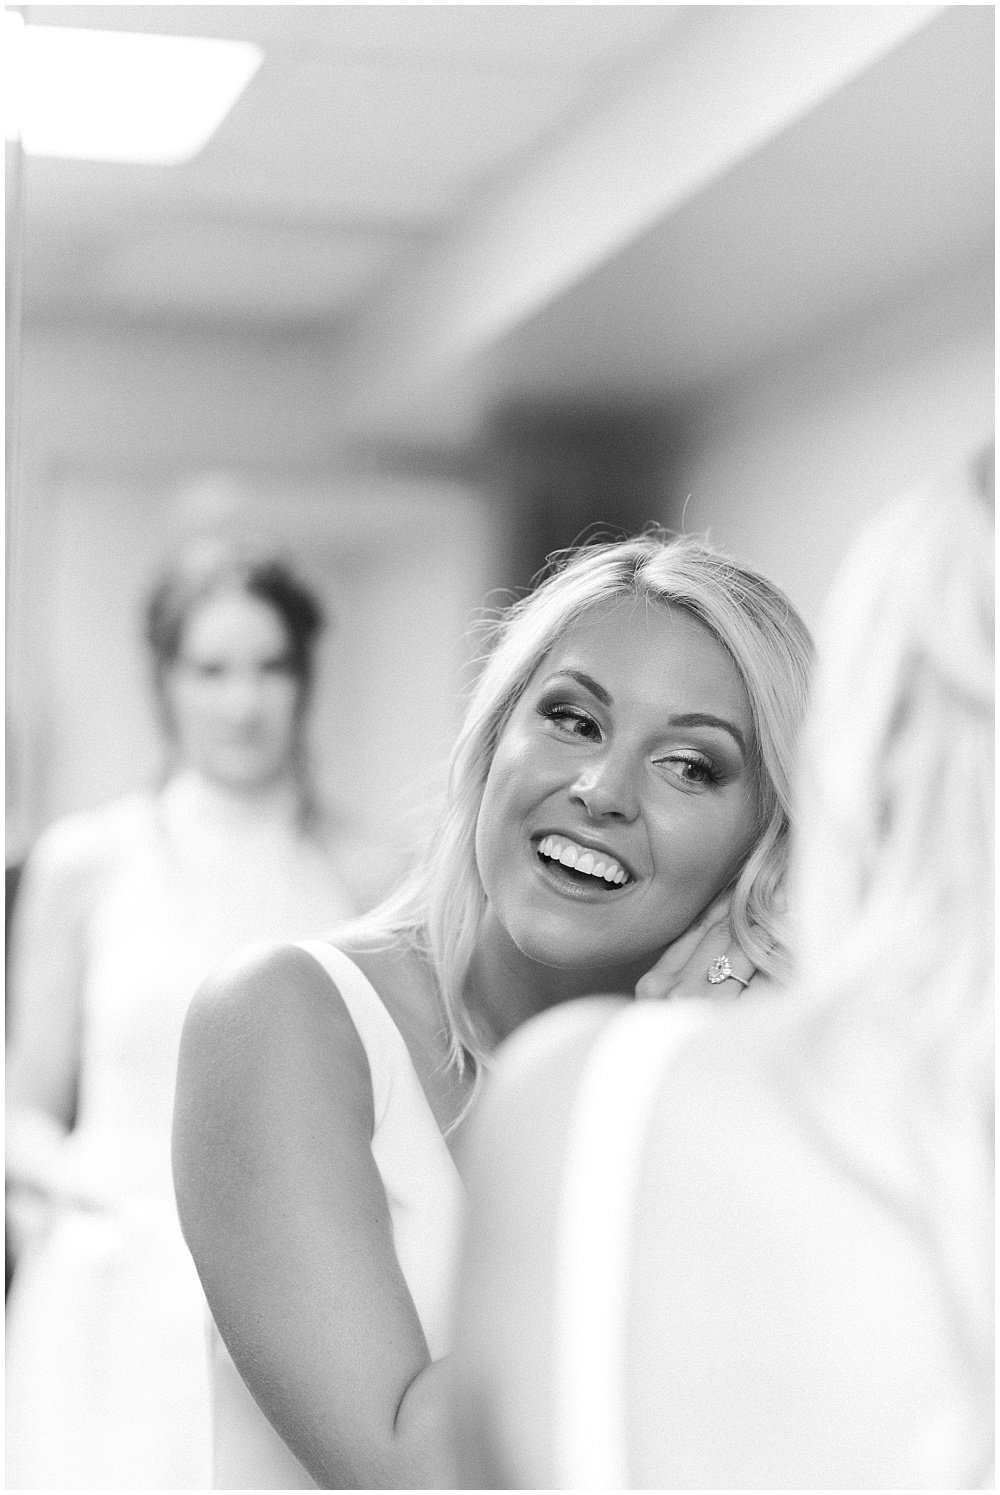 NFL-Player-Nick-Martin-Indianapolis-Indiana-Wedding-The-Knot-Featured-Jessica-Dum-Wedding-Coordination-photo__0004